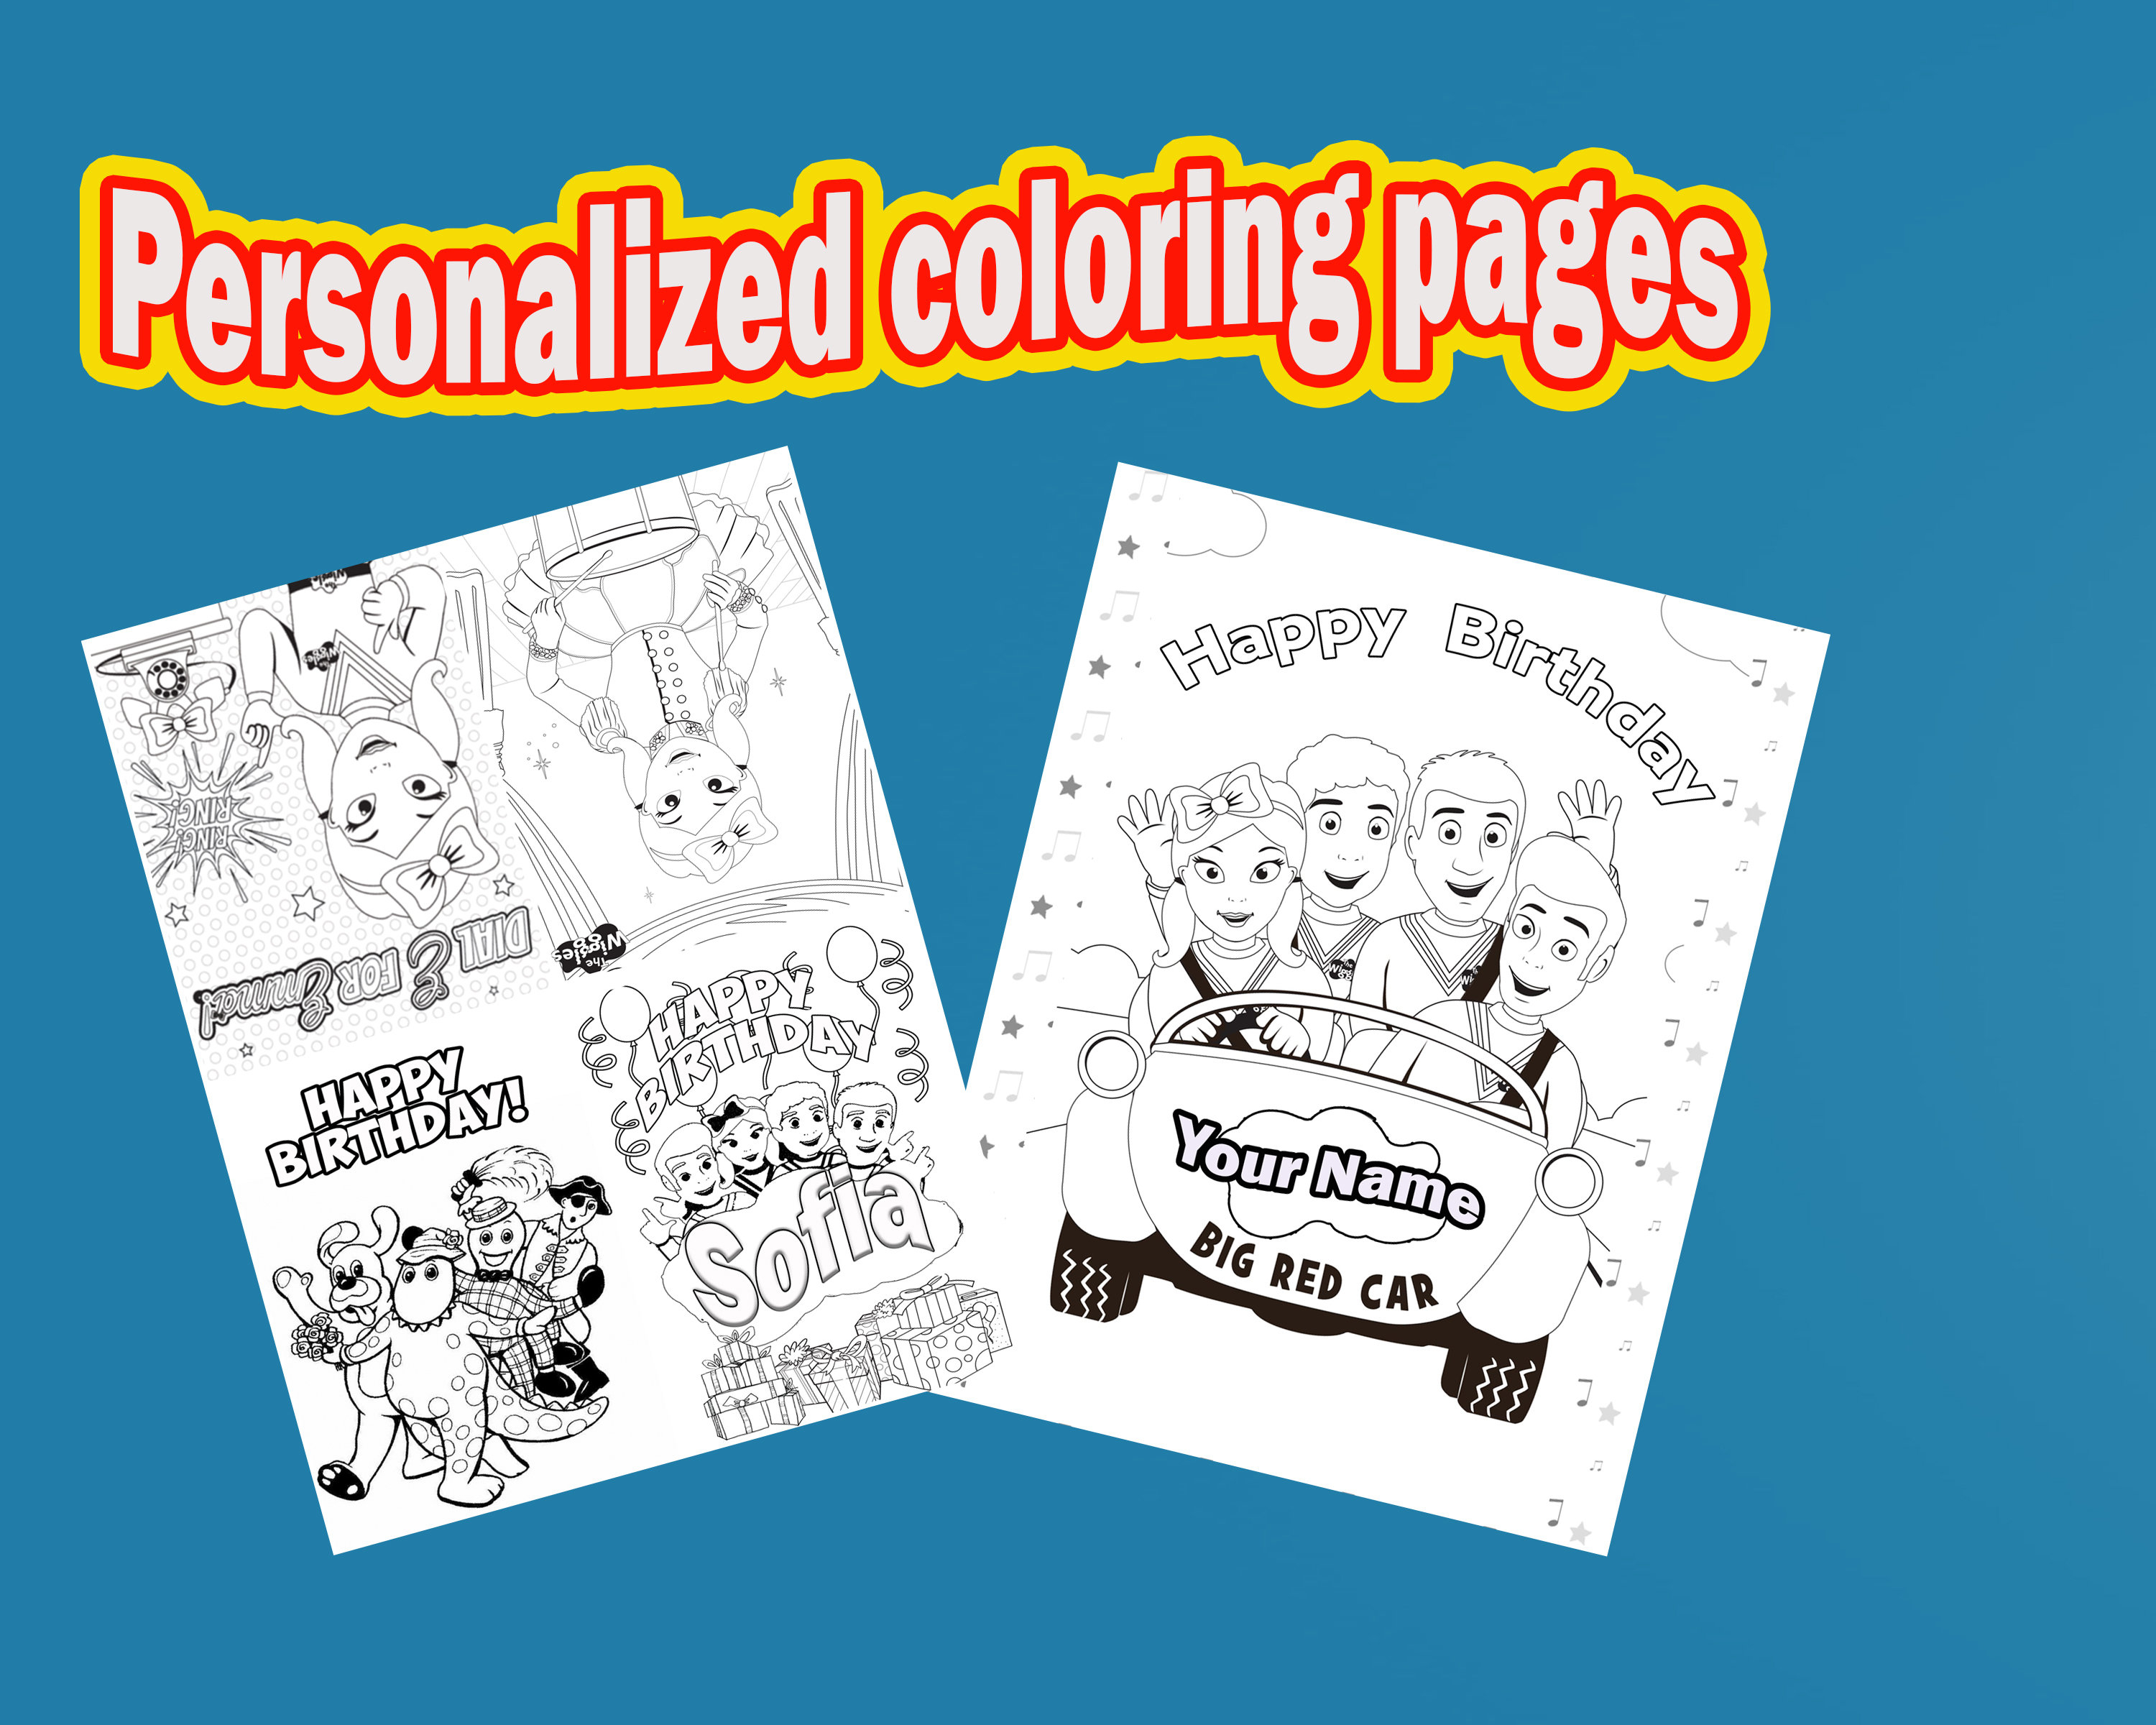 Free Custom Coloring Pages Coloring Pages Personalized Coloring Pages Wedding Colouringd With